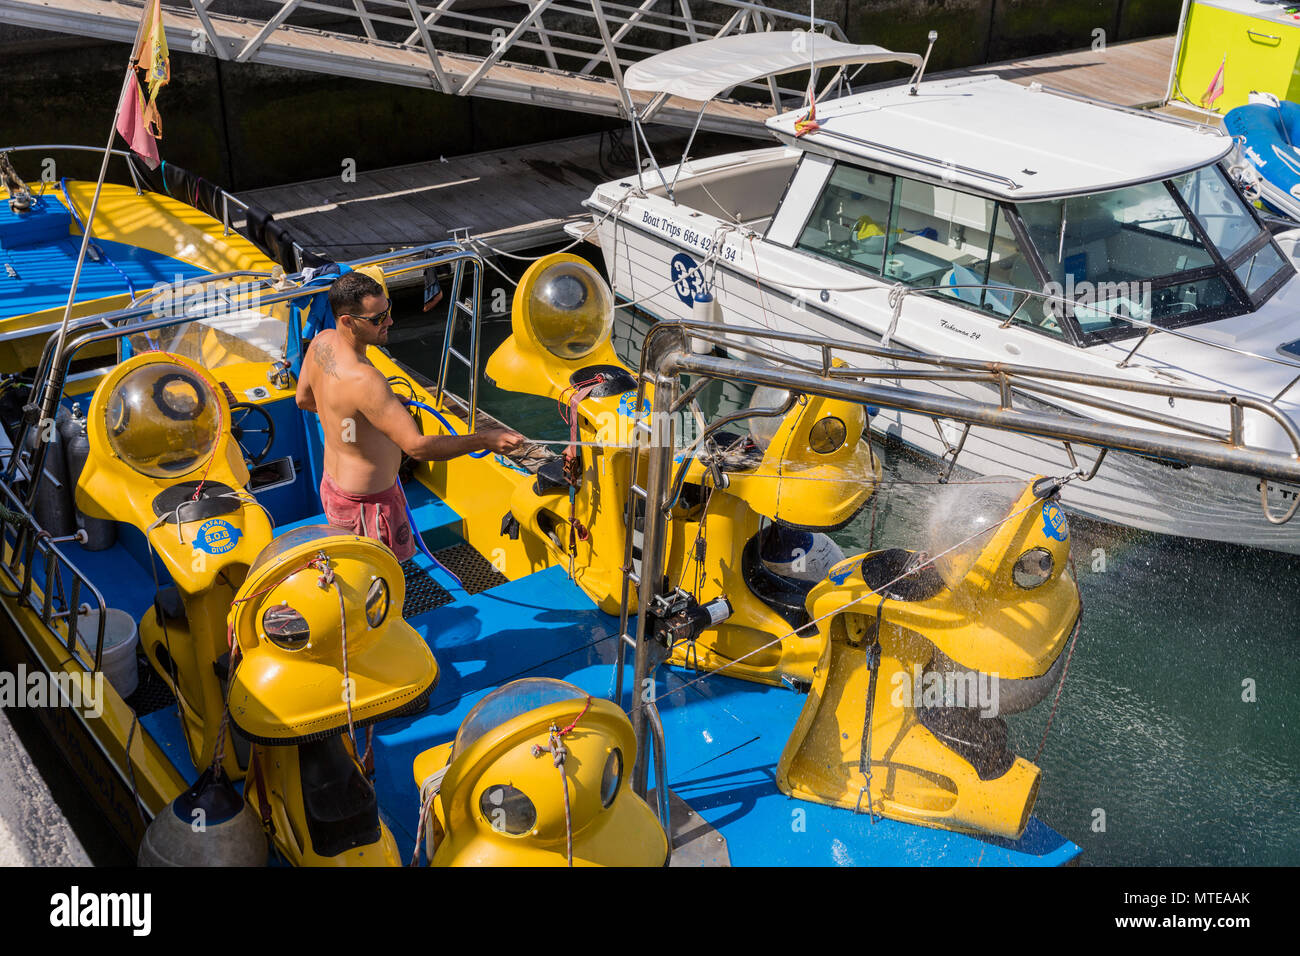 Man washing down BOB diving suits on a tour boat in Puerto Colon marina,  Playa de Las Americas, Tenerife, Canary Islands, Spain Stock Photo - Alamy